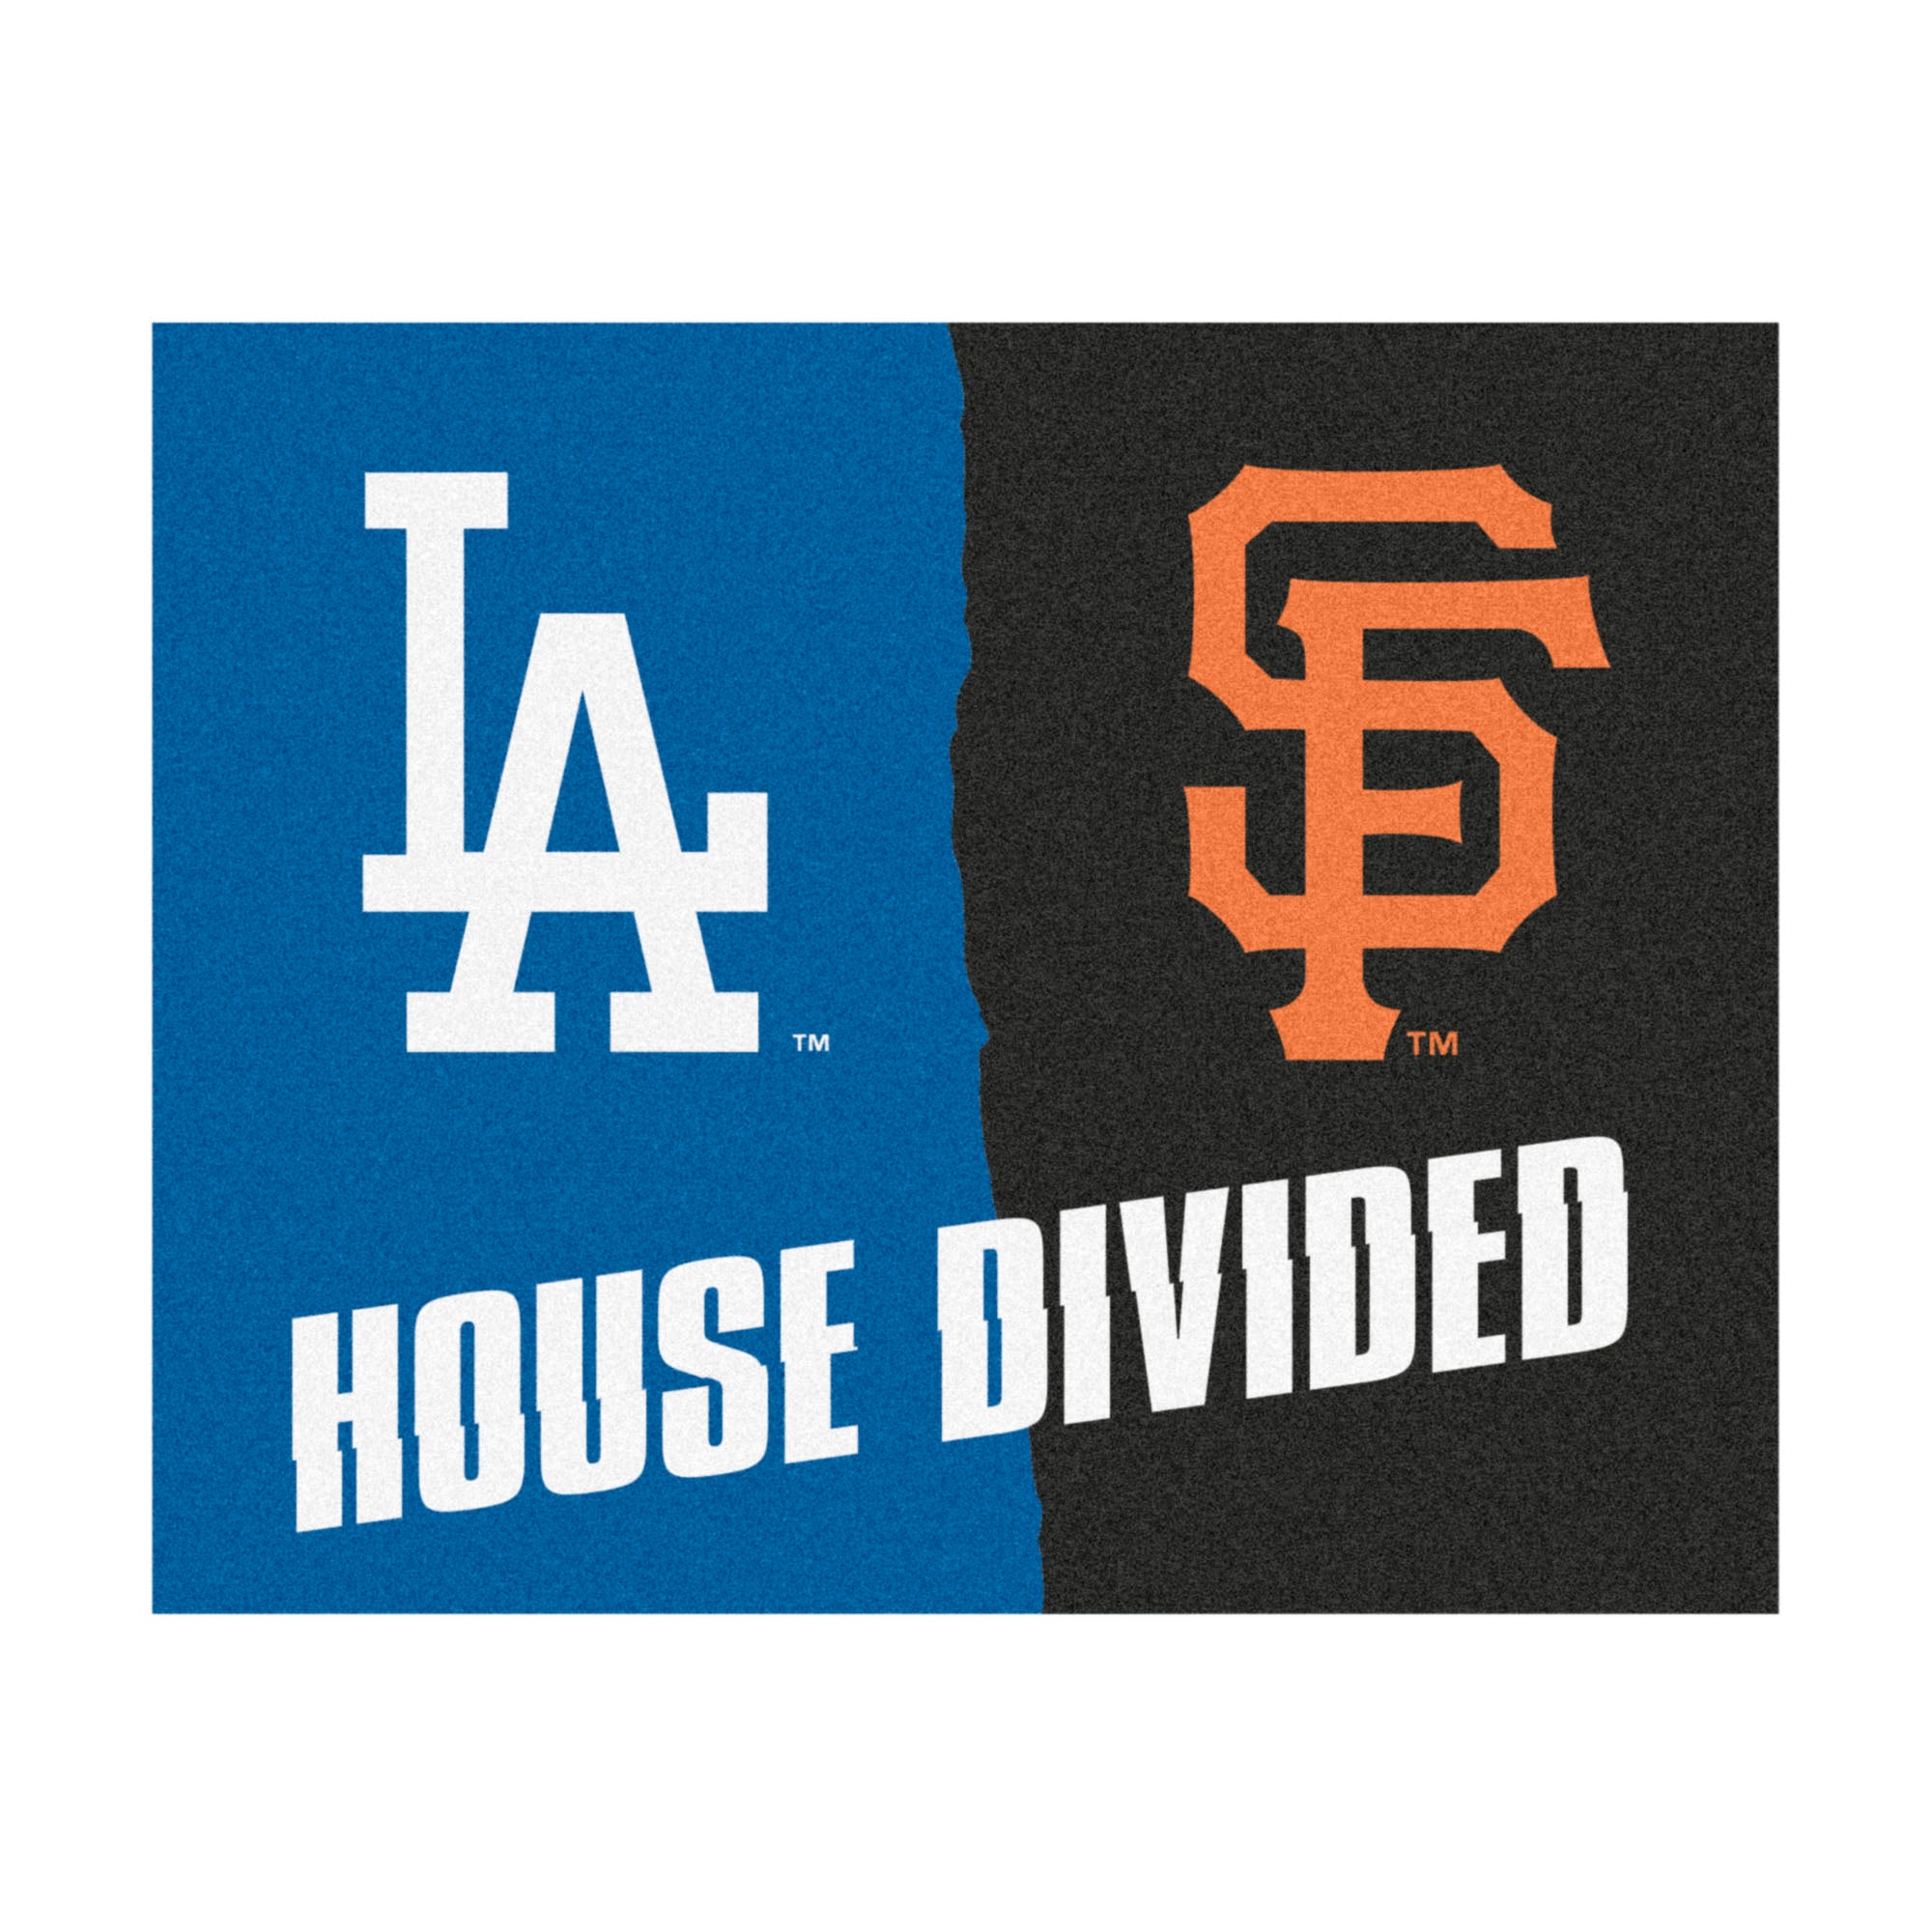 FANMATS, MLB House Divided - Dodgers / Giants House Divided Rug